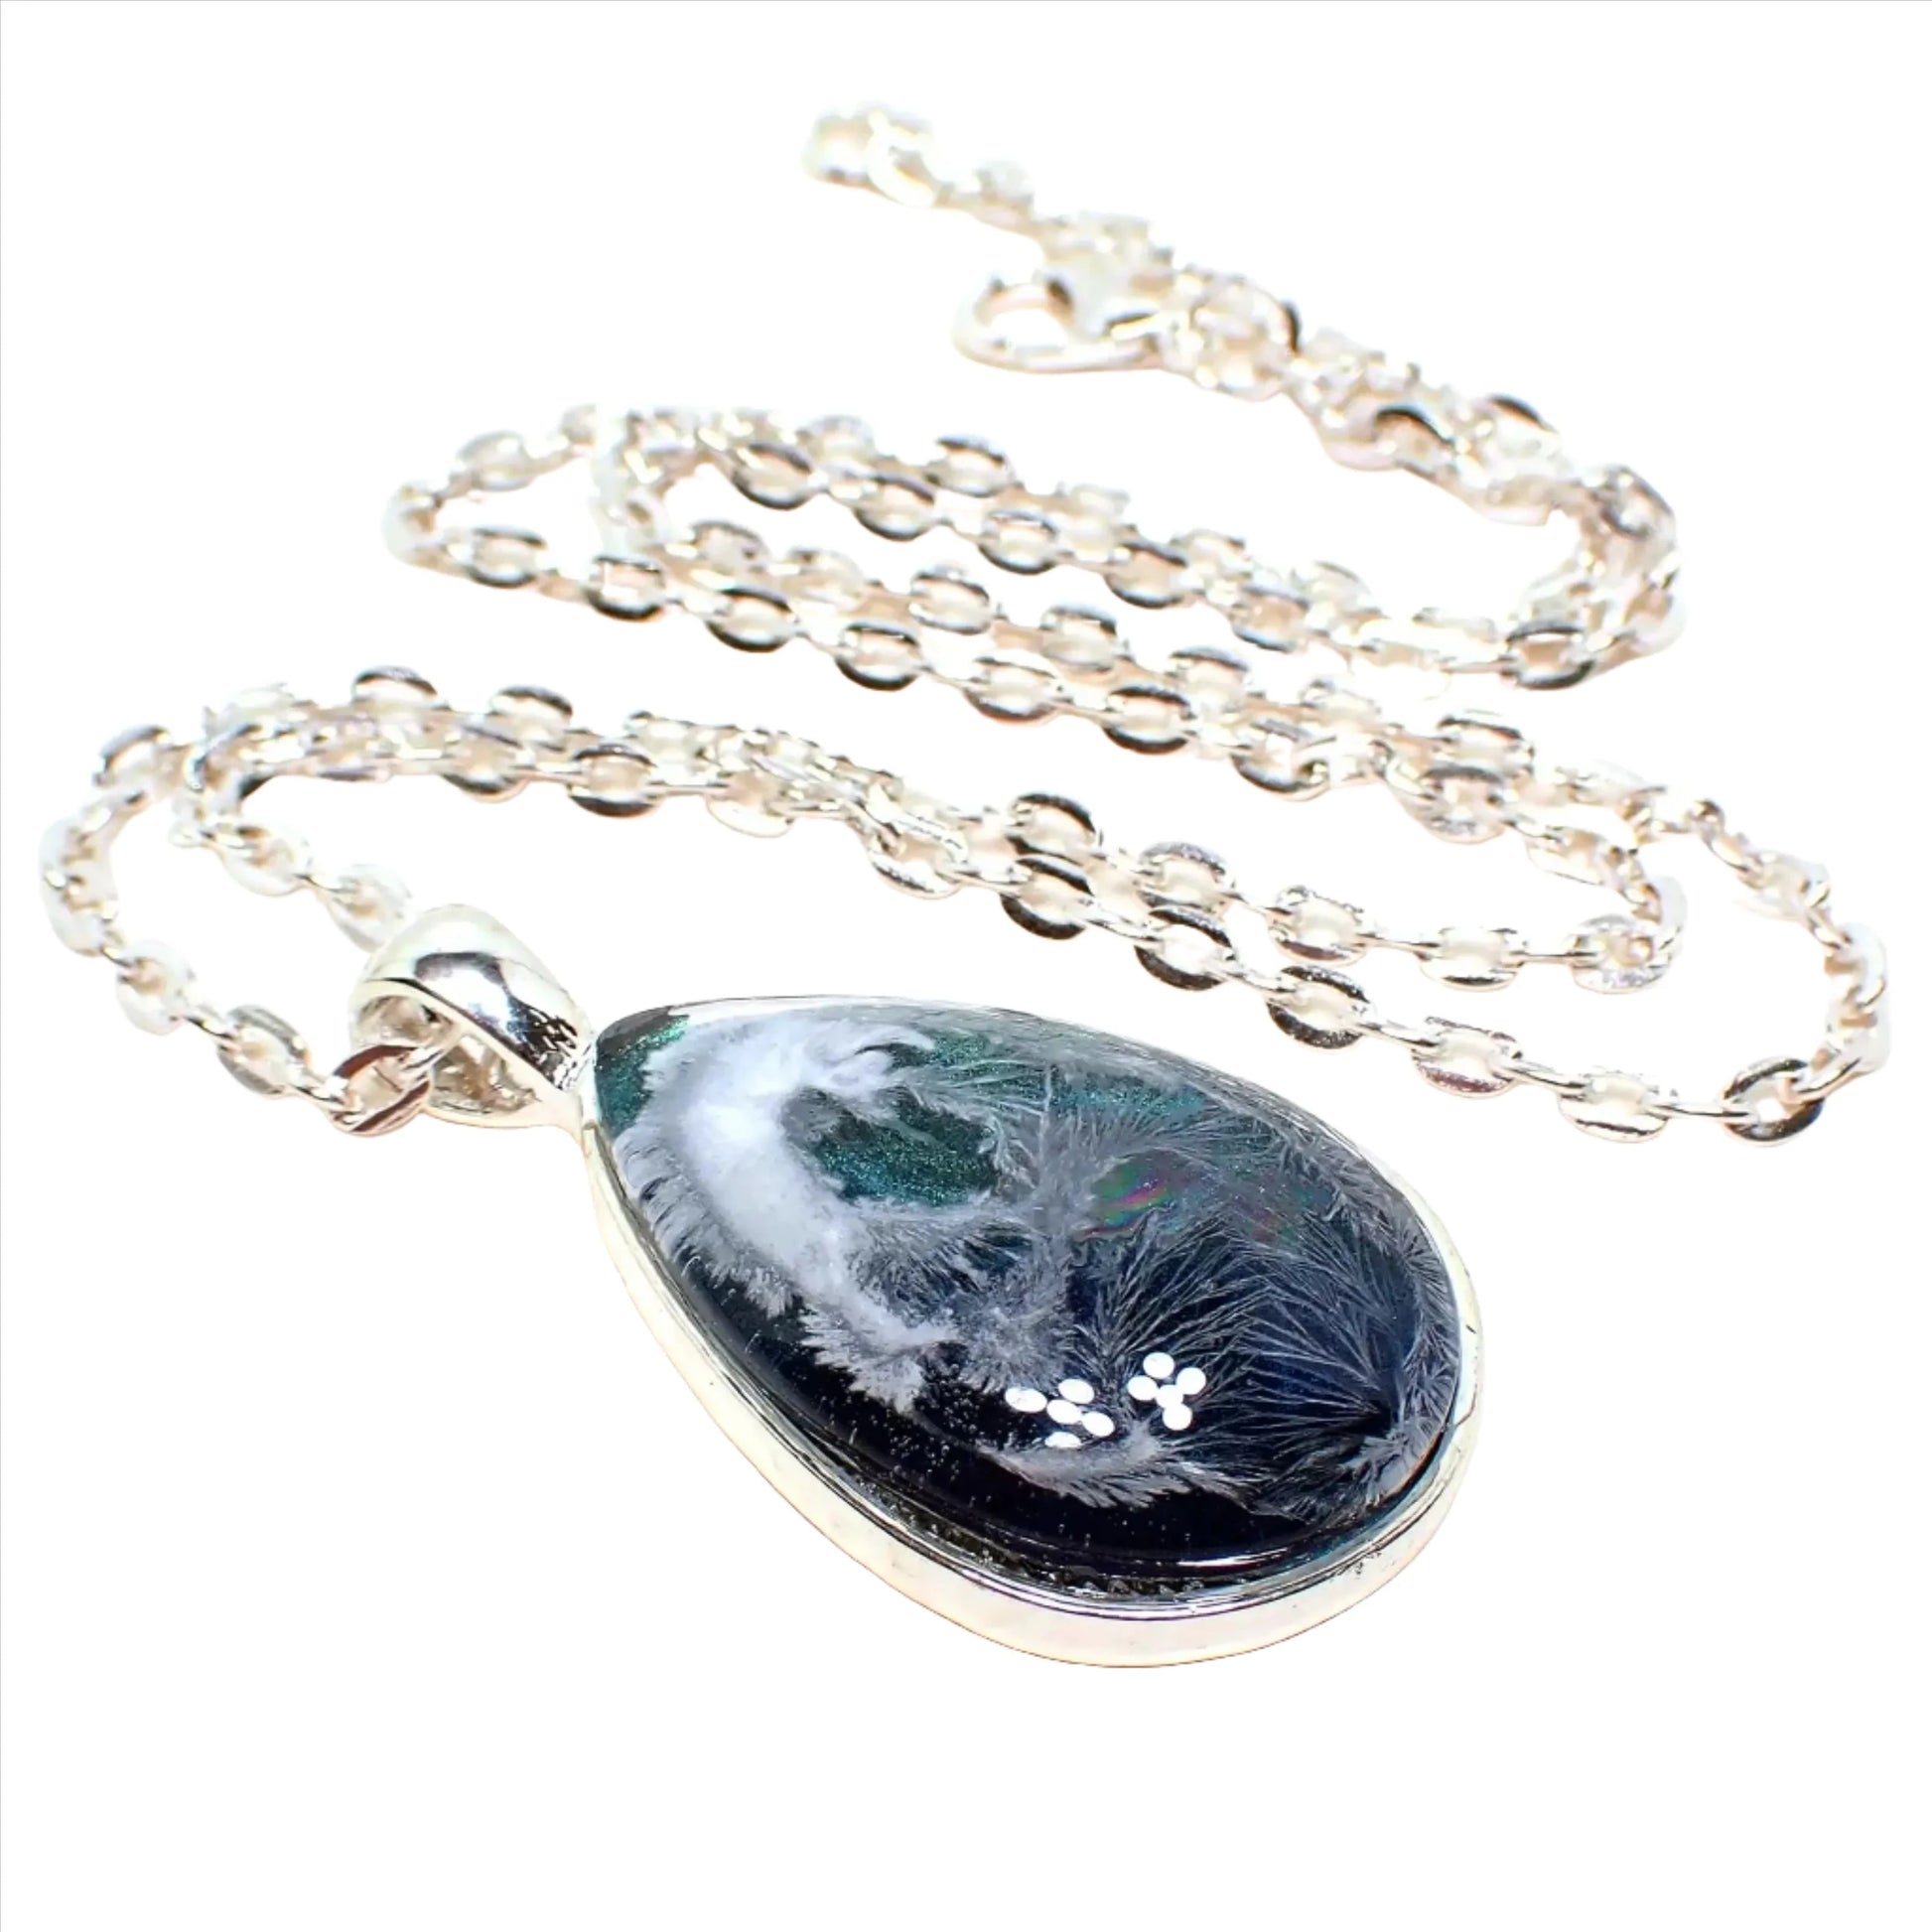 Enlarged angled front view of the handmade Frosty Water resin pendant. The metal is silver plated in color. The pendant is teardrop shaped and has iridescent blue at the bottom to an iridescent green on the top. There is an abstract frost like design in white through the resin.